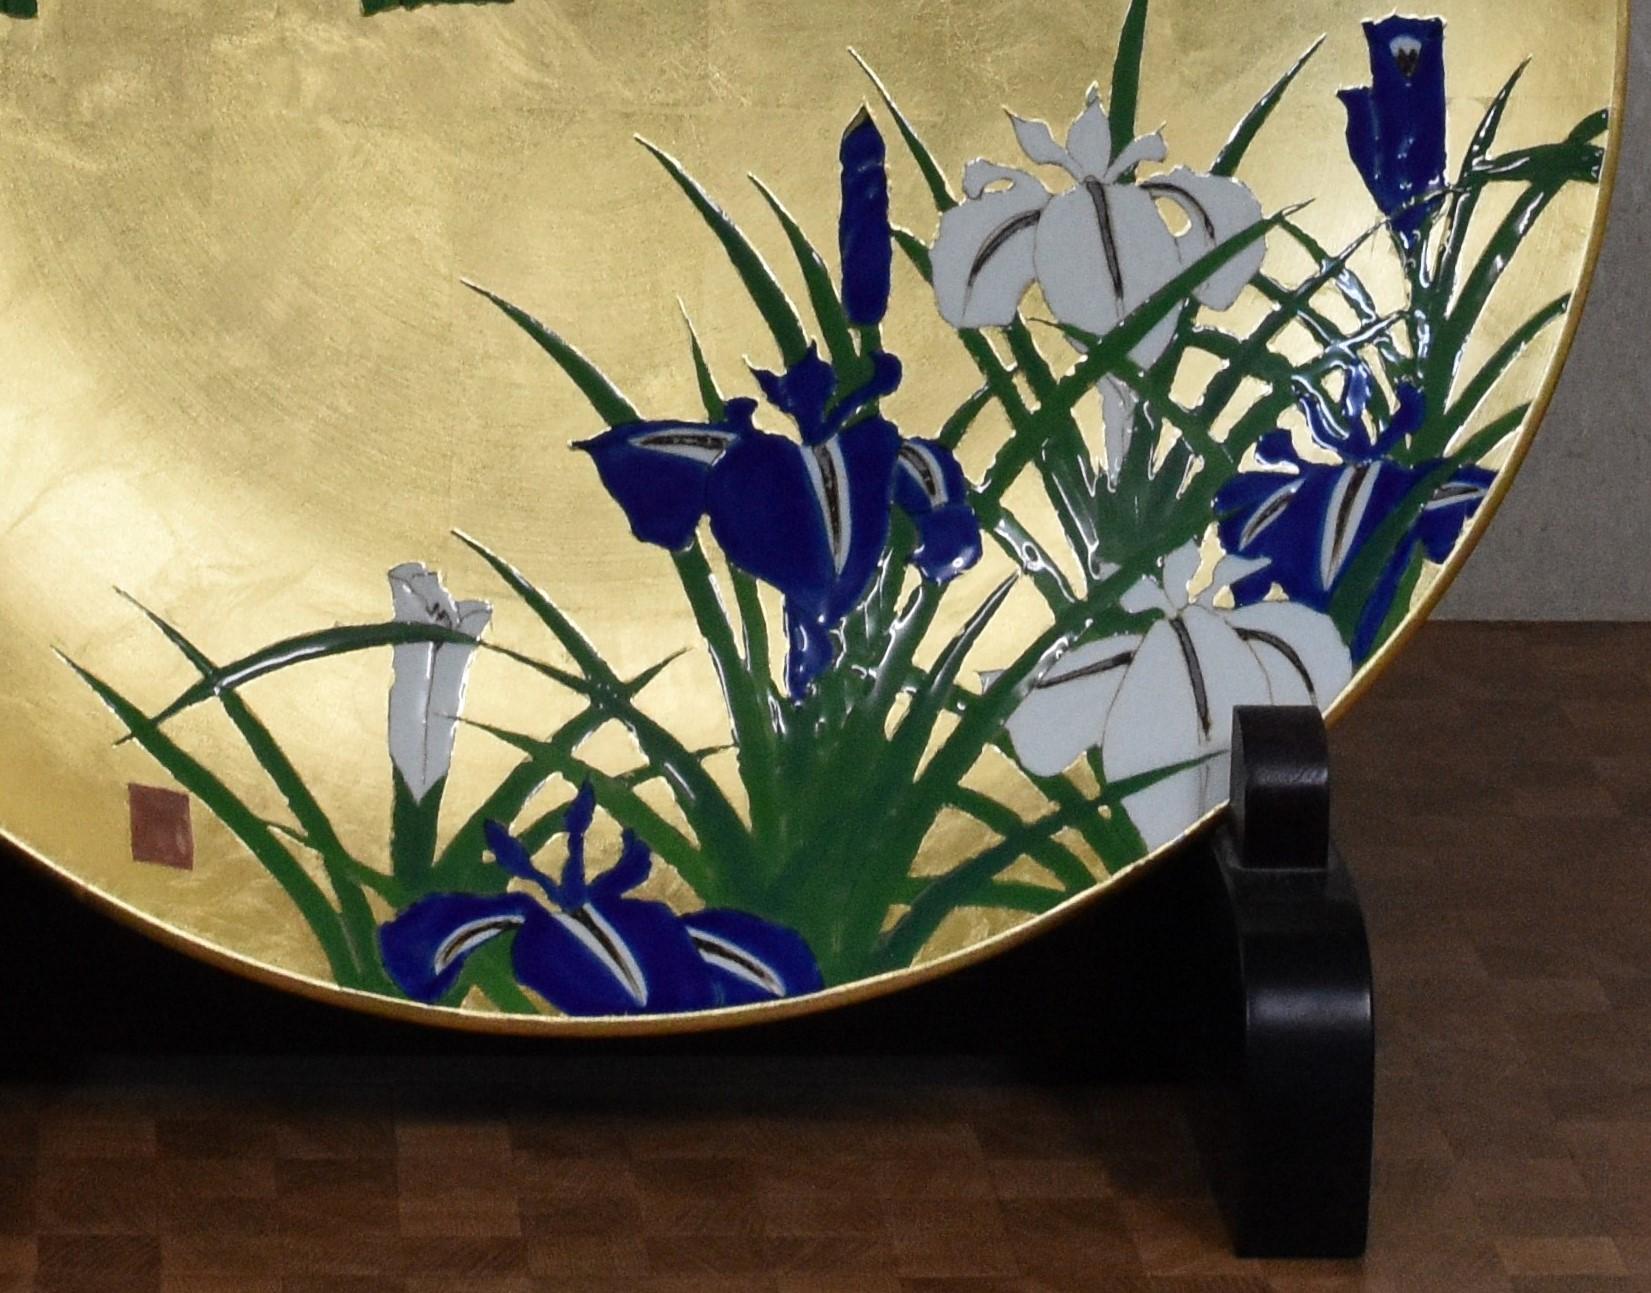 Extraordinary Japanese contemporary museum quality decorative porcelain charger breathtakingly hand painted in a stunning iris motif in vivid purple/blue, white and green on a magnificent gold leaf background. This is a signed masterpiece by a third